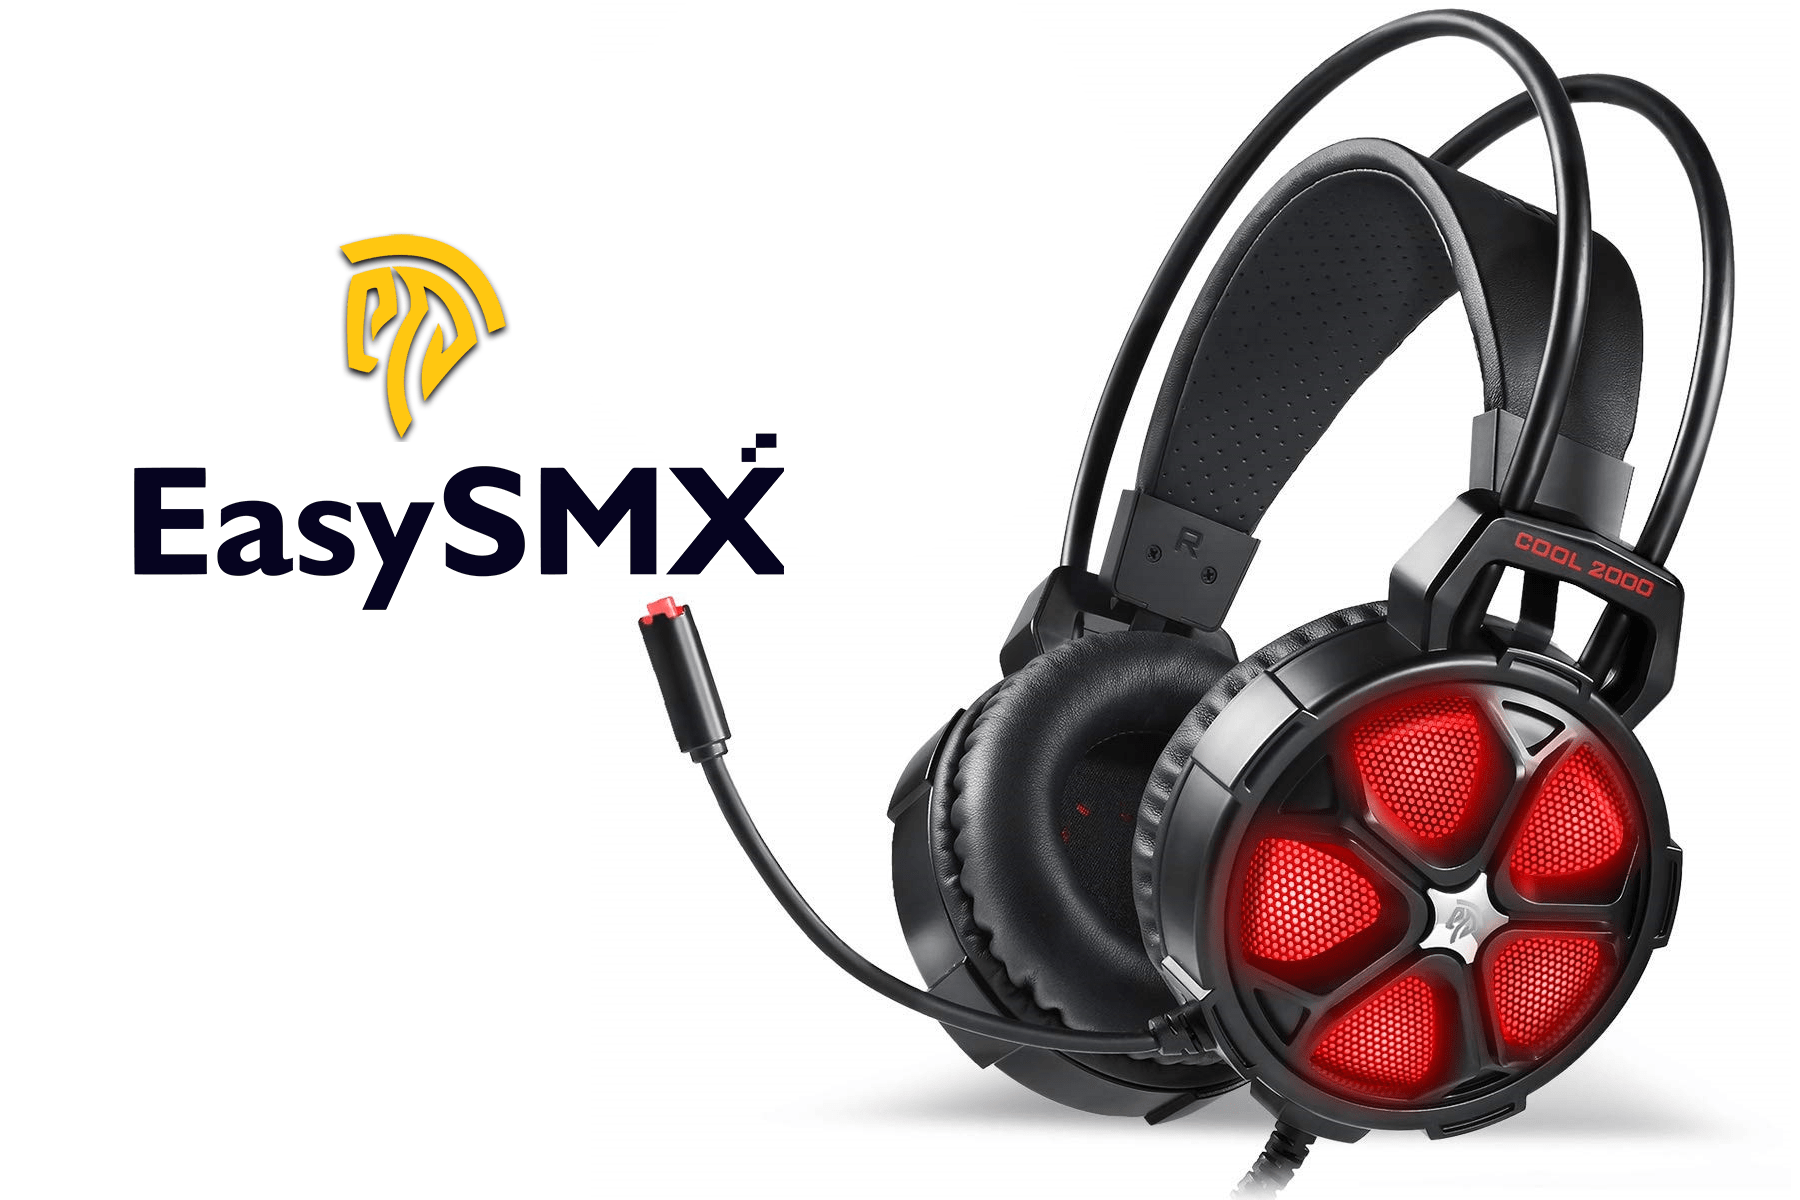 EasySMX Cool 2000 Gaming Headset Review